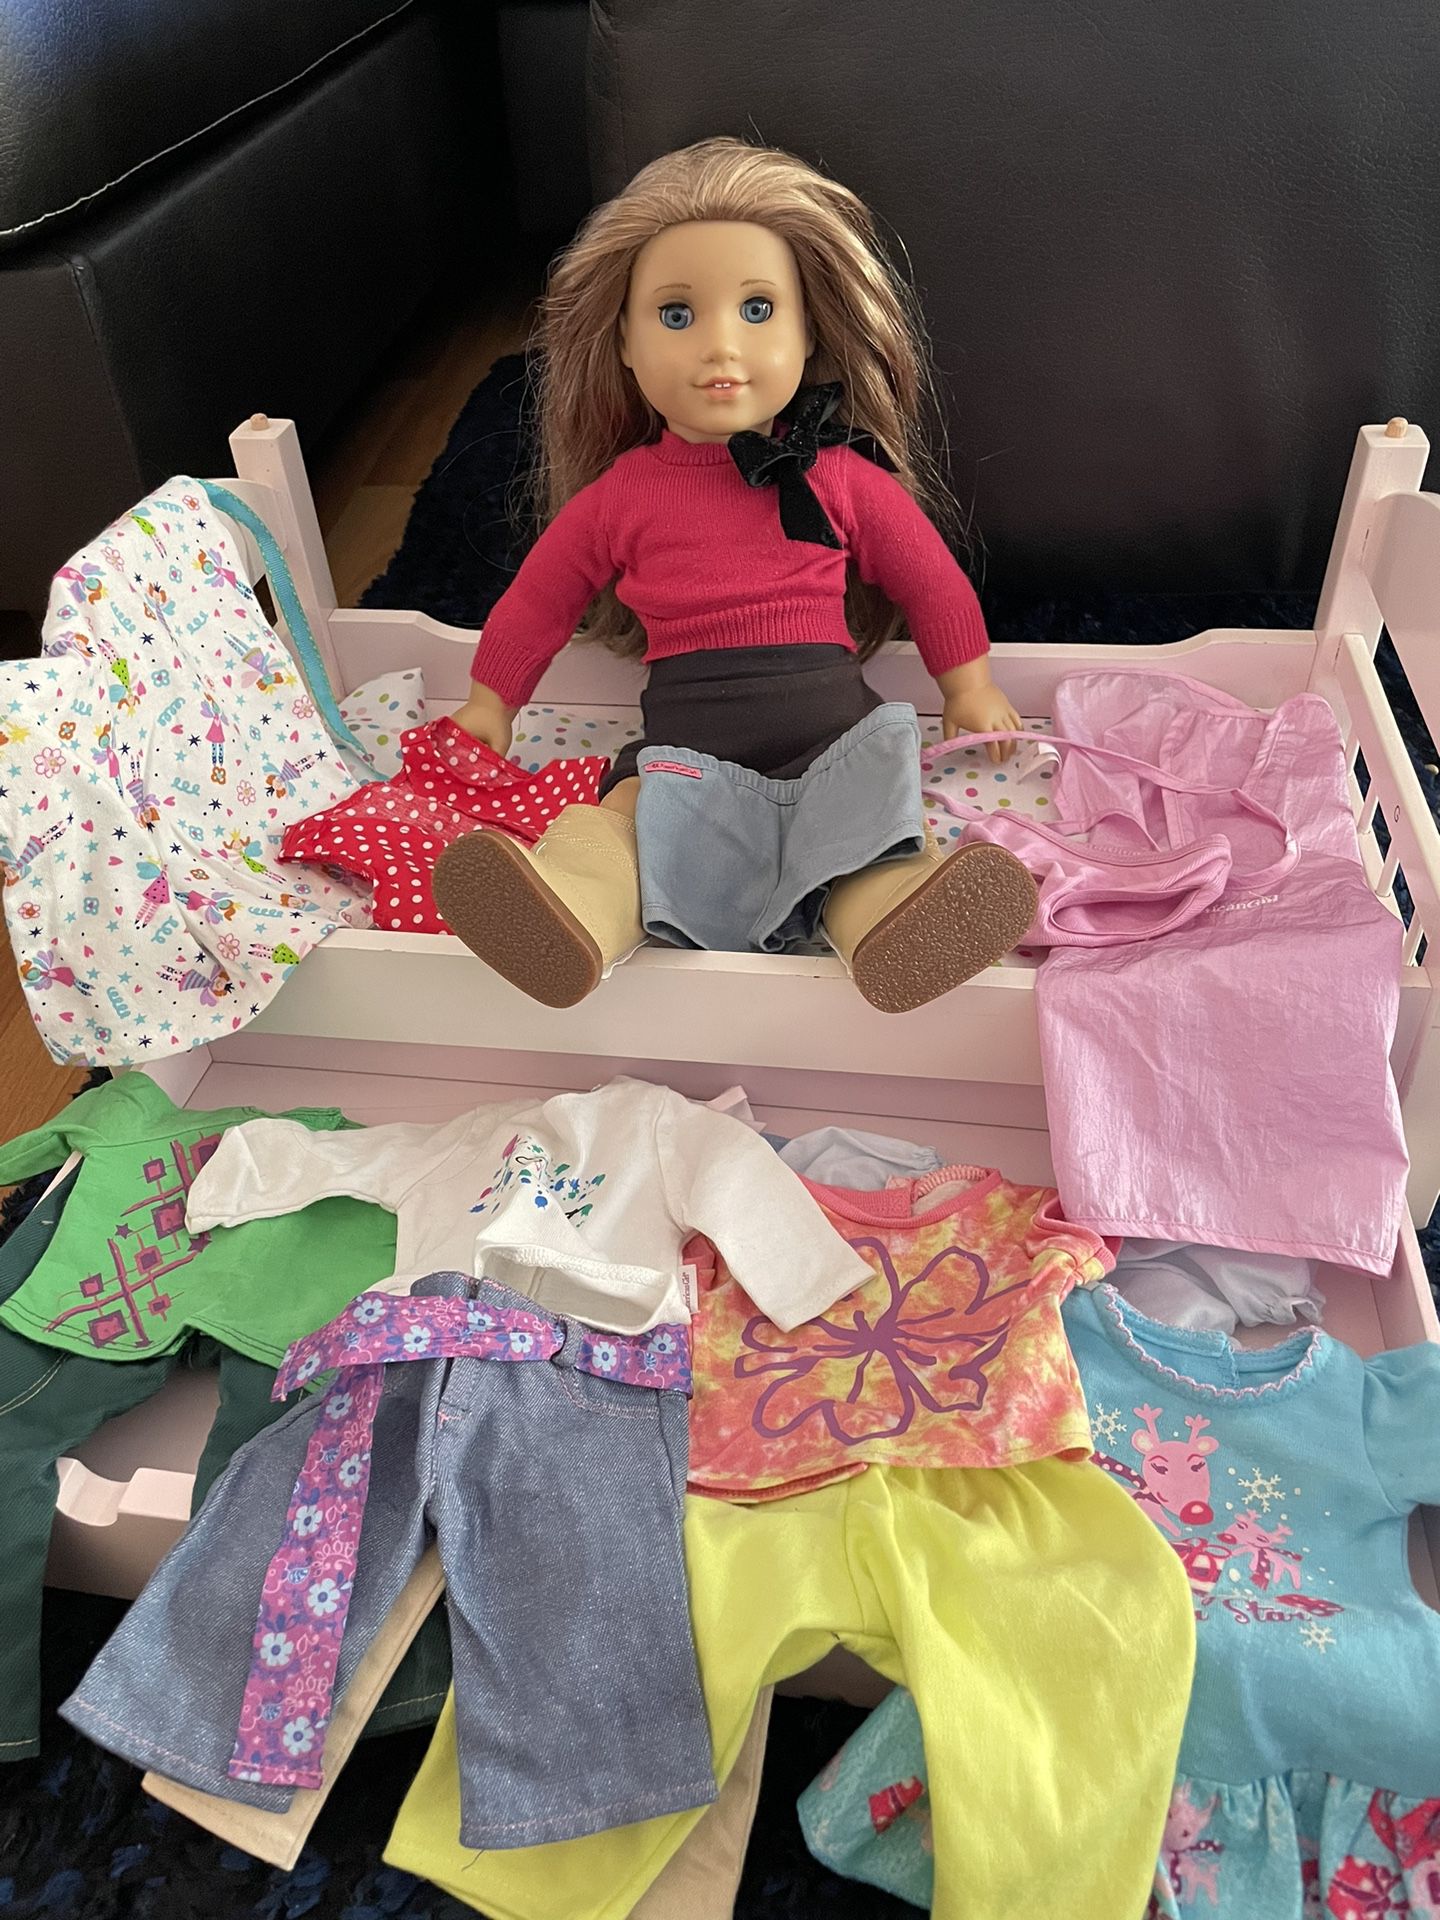 American girl Doll, Bed With Drawers For Clothes